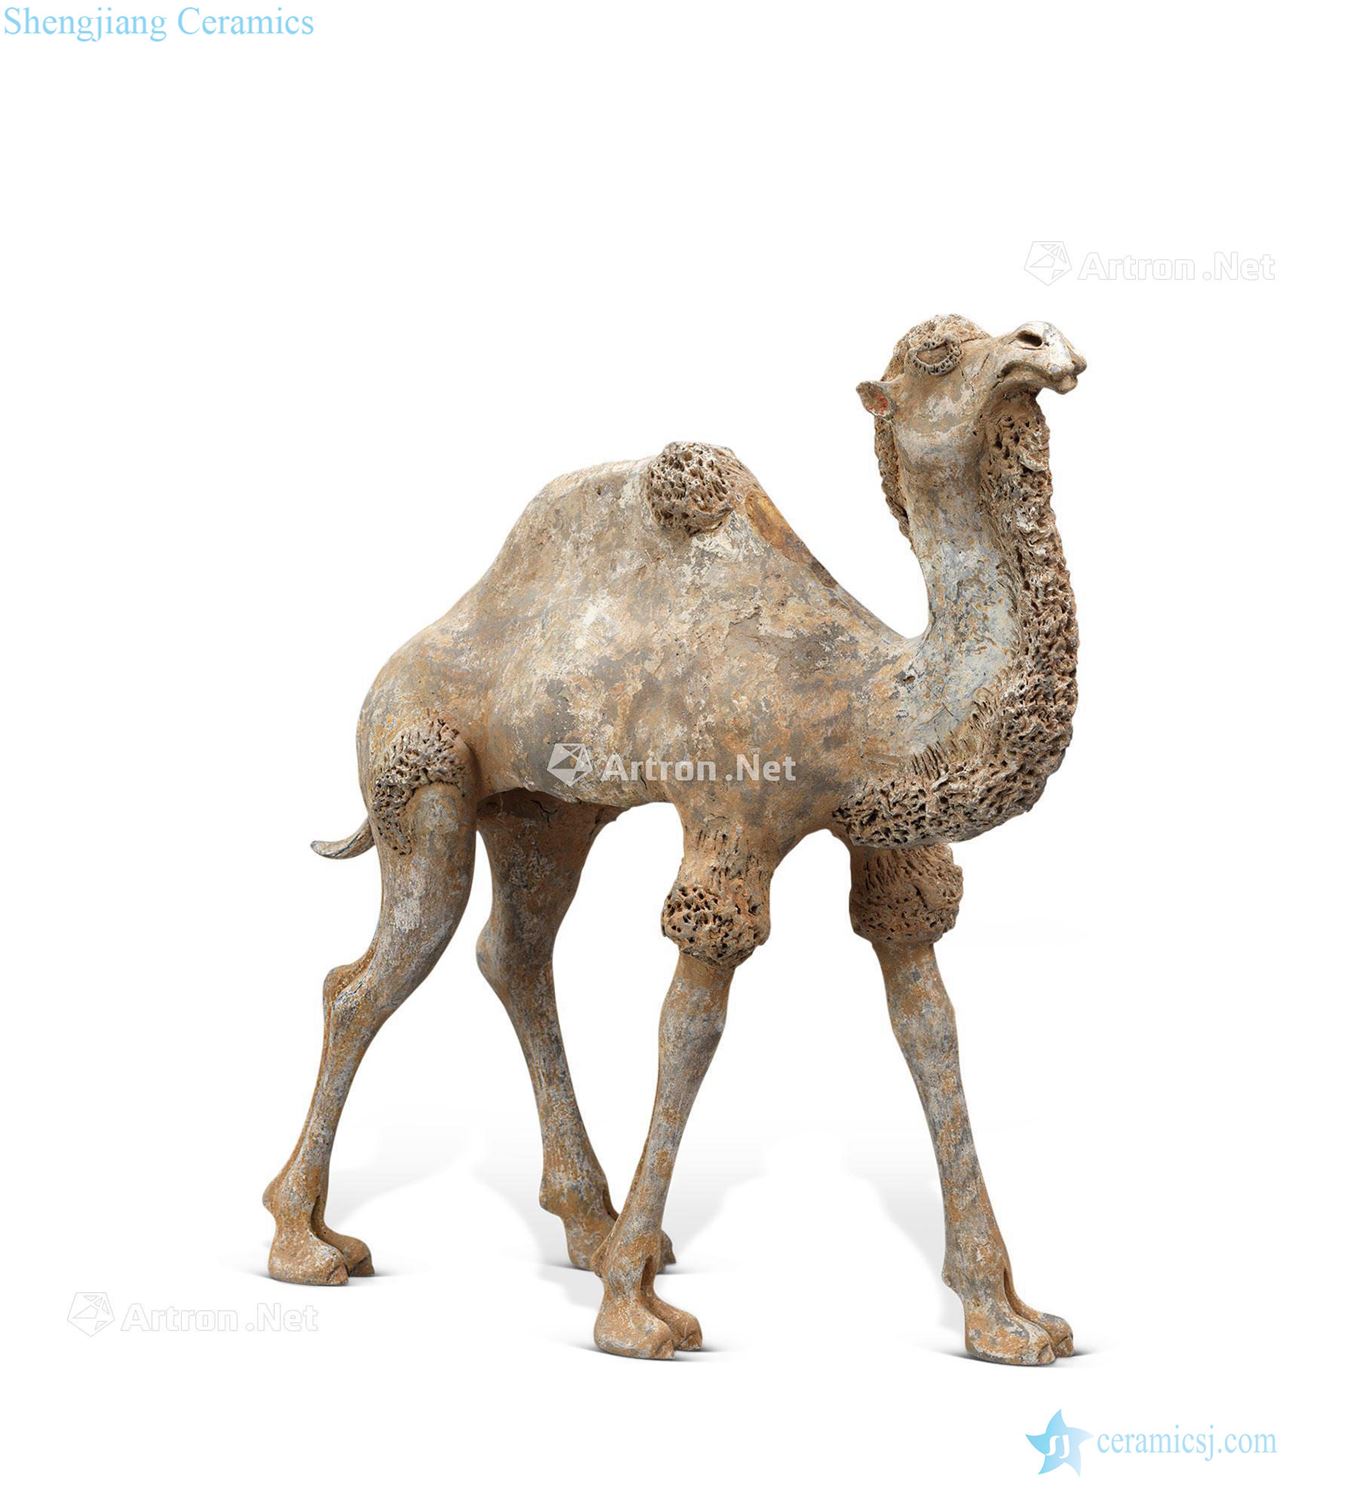 Tang dynasty pottery with camels